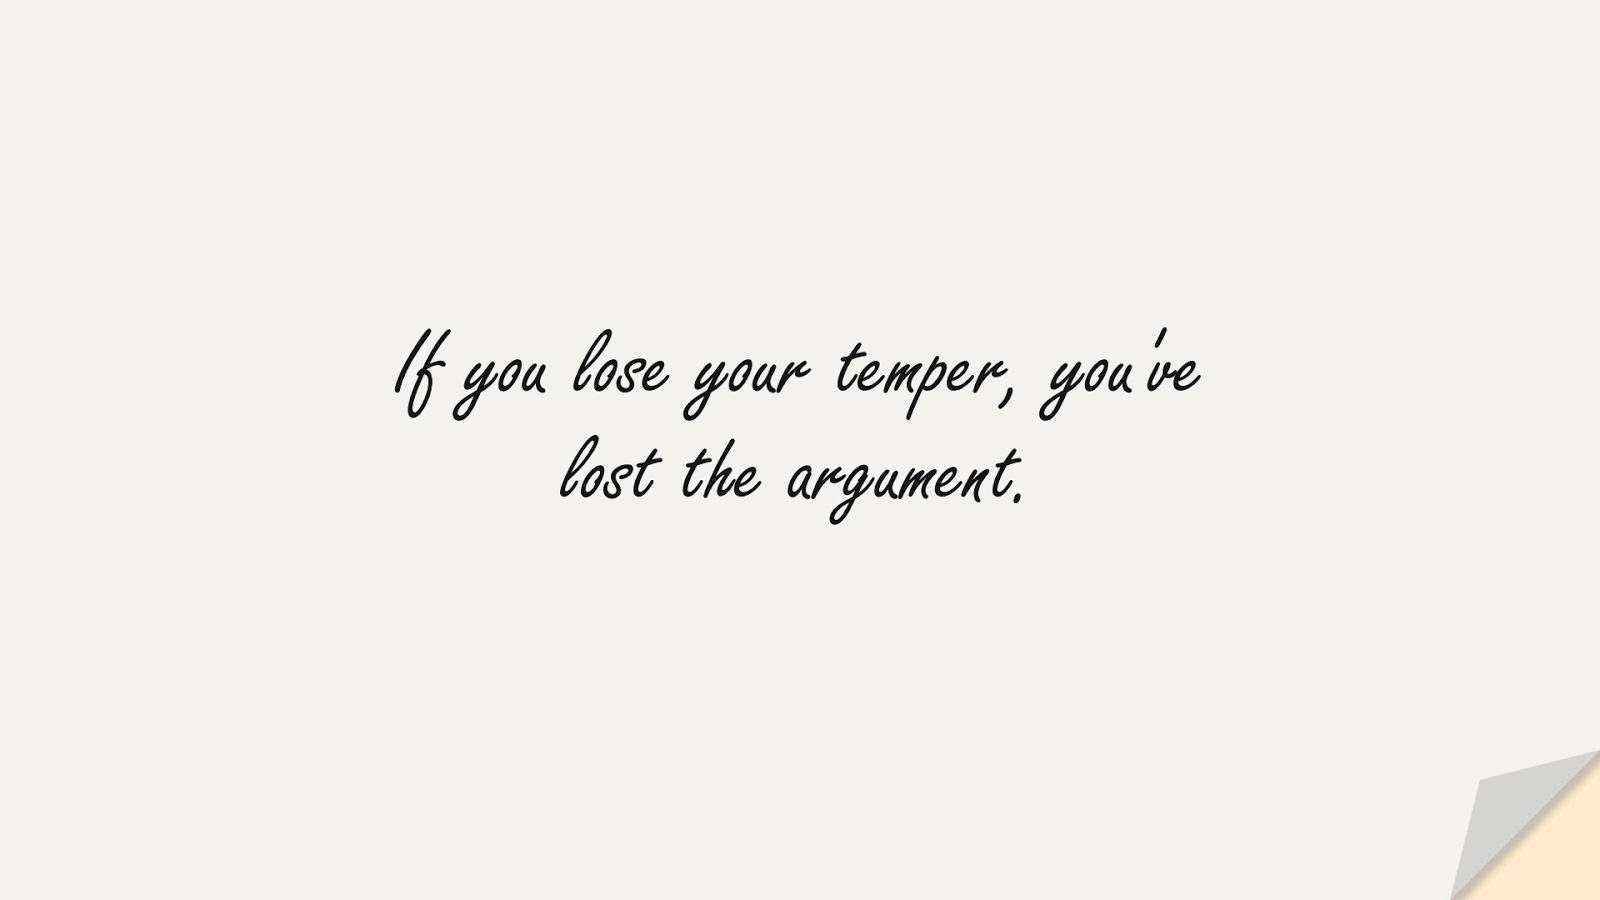 If you lose your temper, you've lost the argument.FALSE